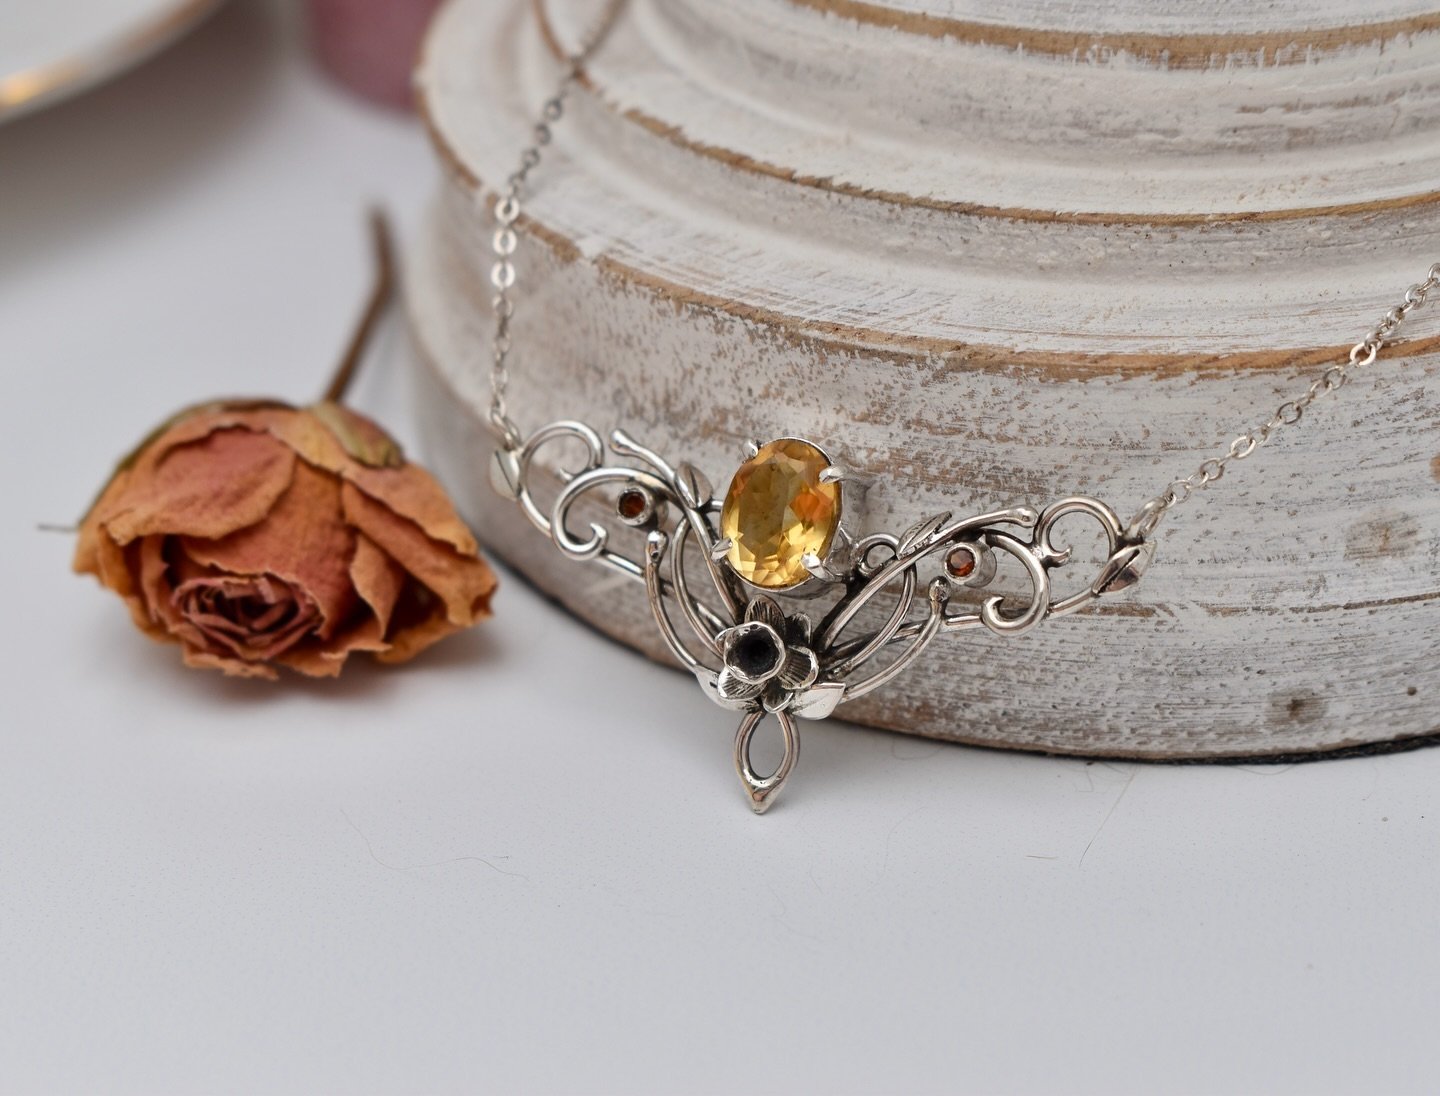 Daffodils are about to bloom in the Spring Court! This months drop will feature beautiful delicate daffodils with vibrant yellow Citrine gemstones. Perfect for mild sunny weather, whispy gossamer dresses, and walks in the rose garden. Coming March 31